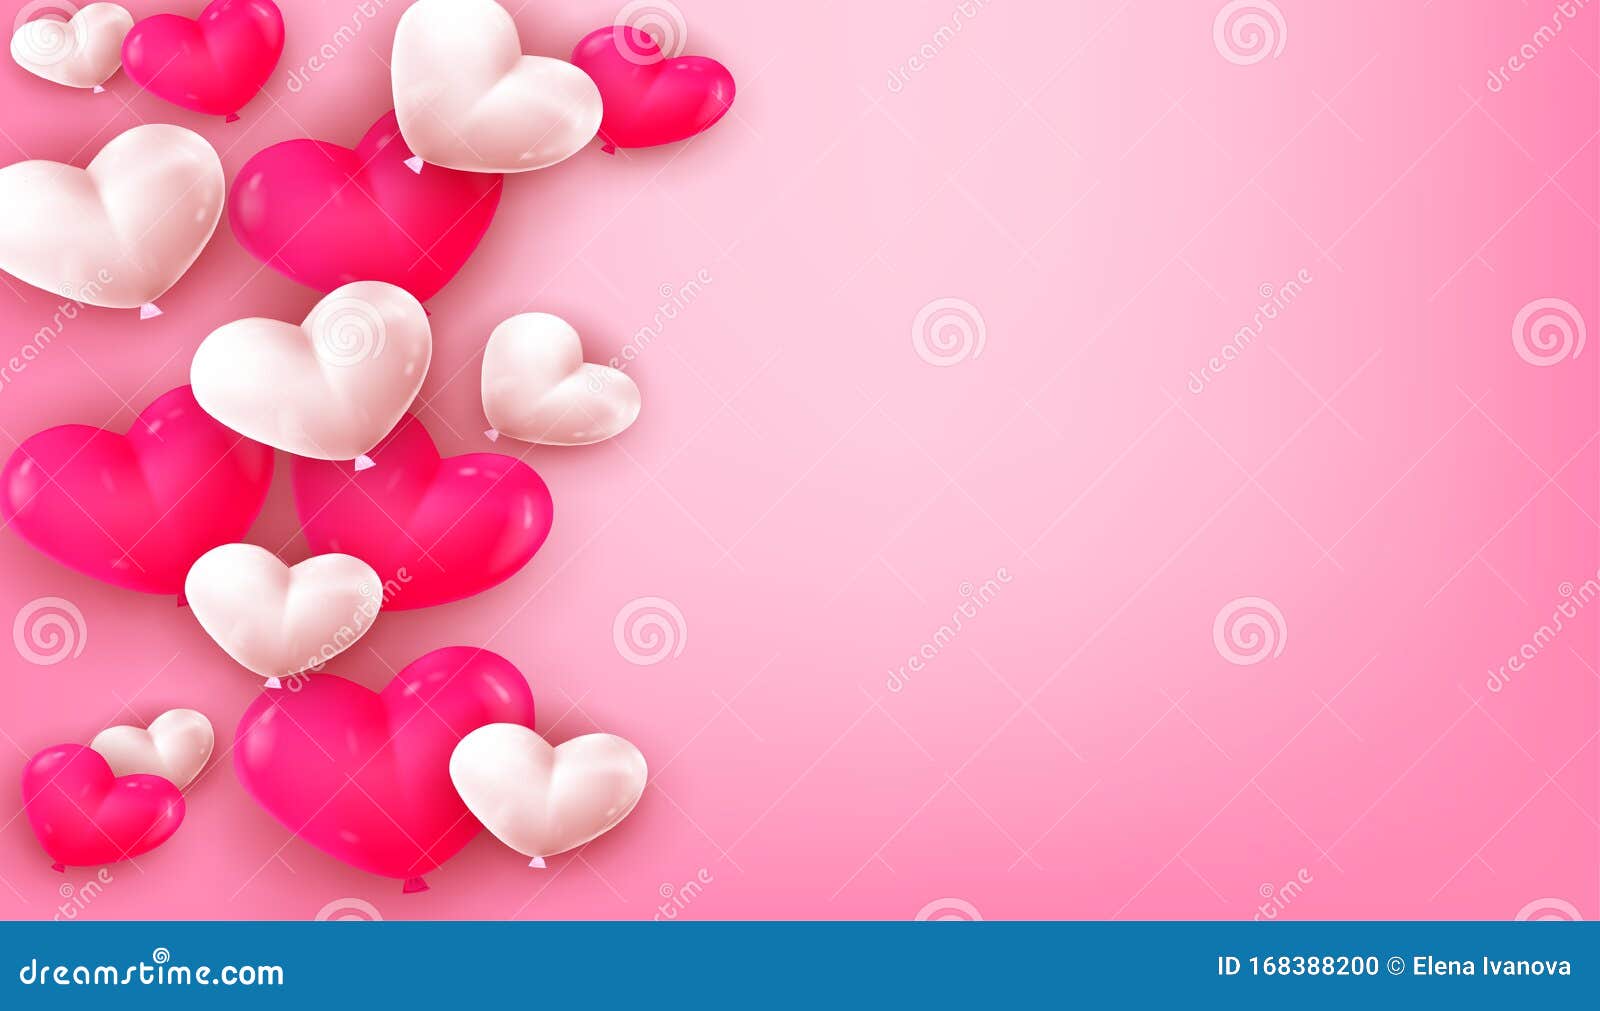 Romantic 3d Heart Wallpaper Perfect For Valentine S Day Weddings And  Anniversaries Background, Heart 3d, Love Gift, Heart Banner Background  Image And Wallpaper for Free Download